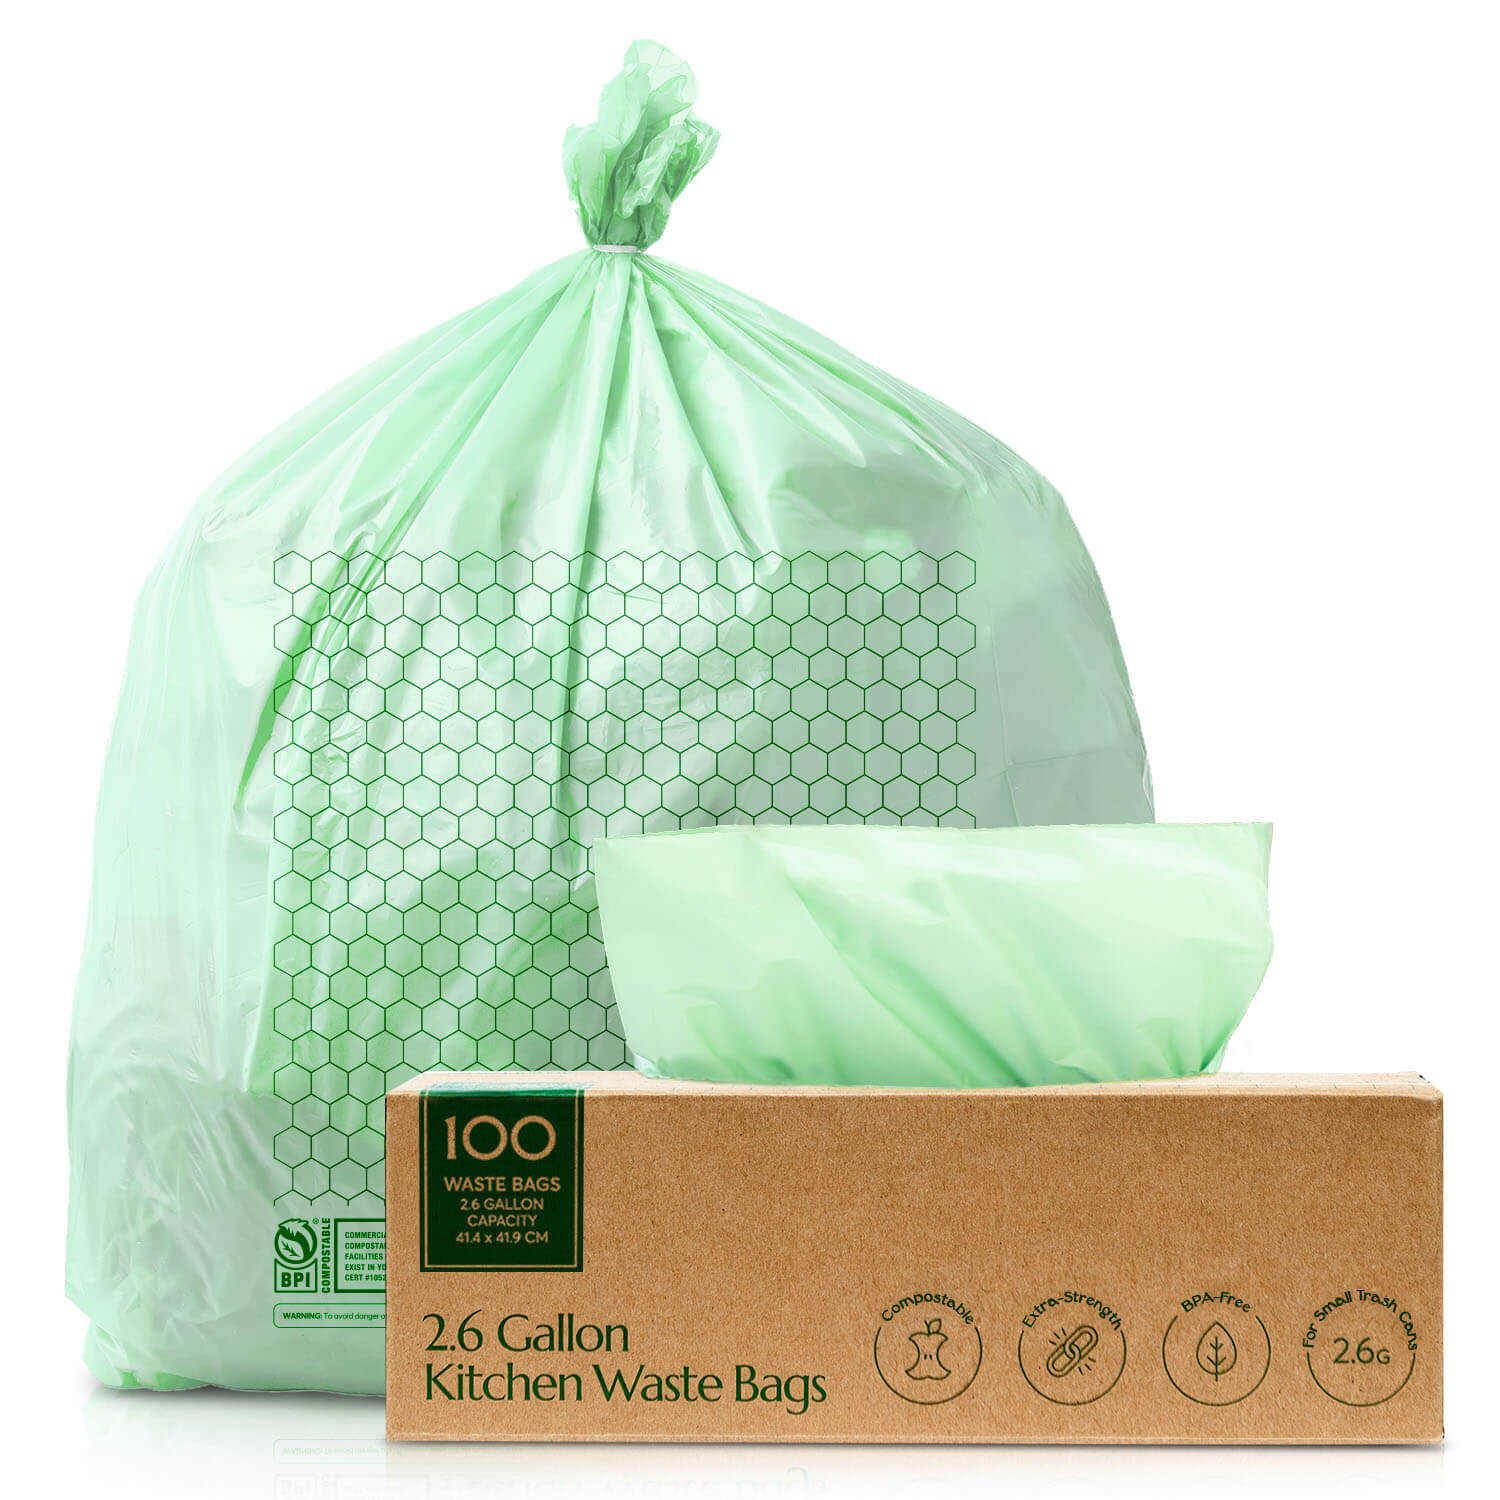 C Crystal Lemon 50 Counts Compostable Trash Bags, 6 Gallon Heavy Duty Trash Bags and Kitchen Garbage Bags